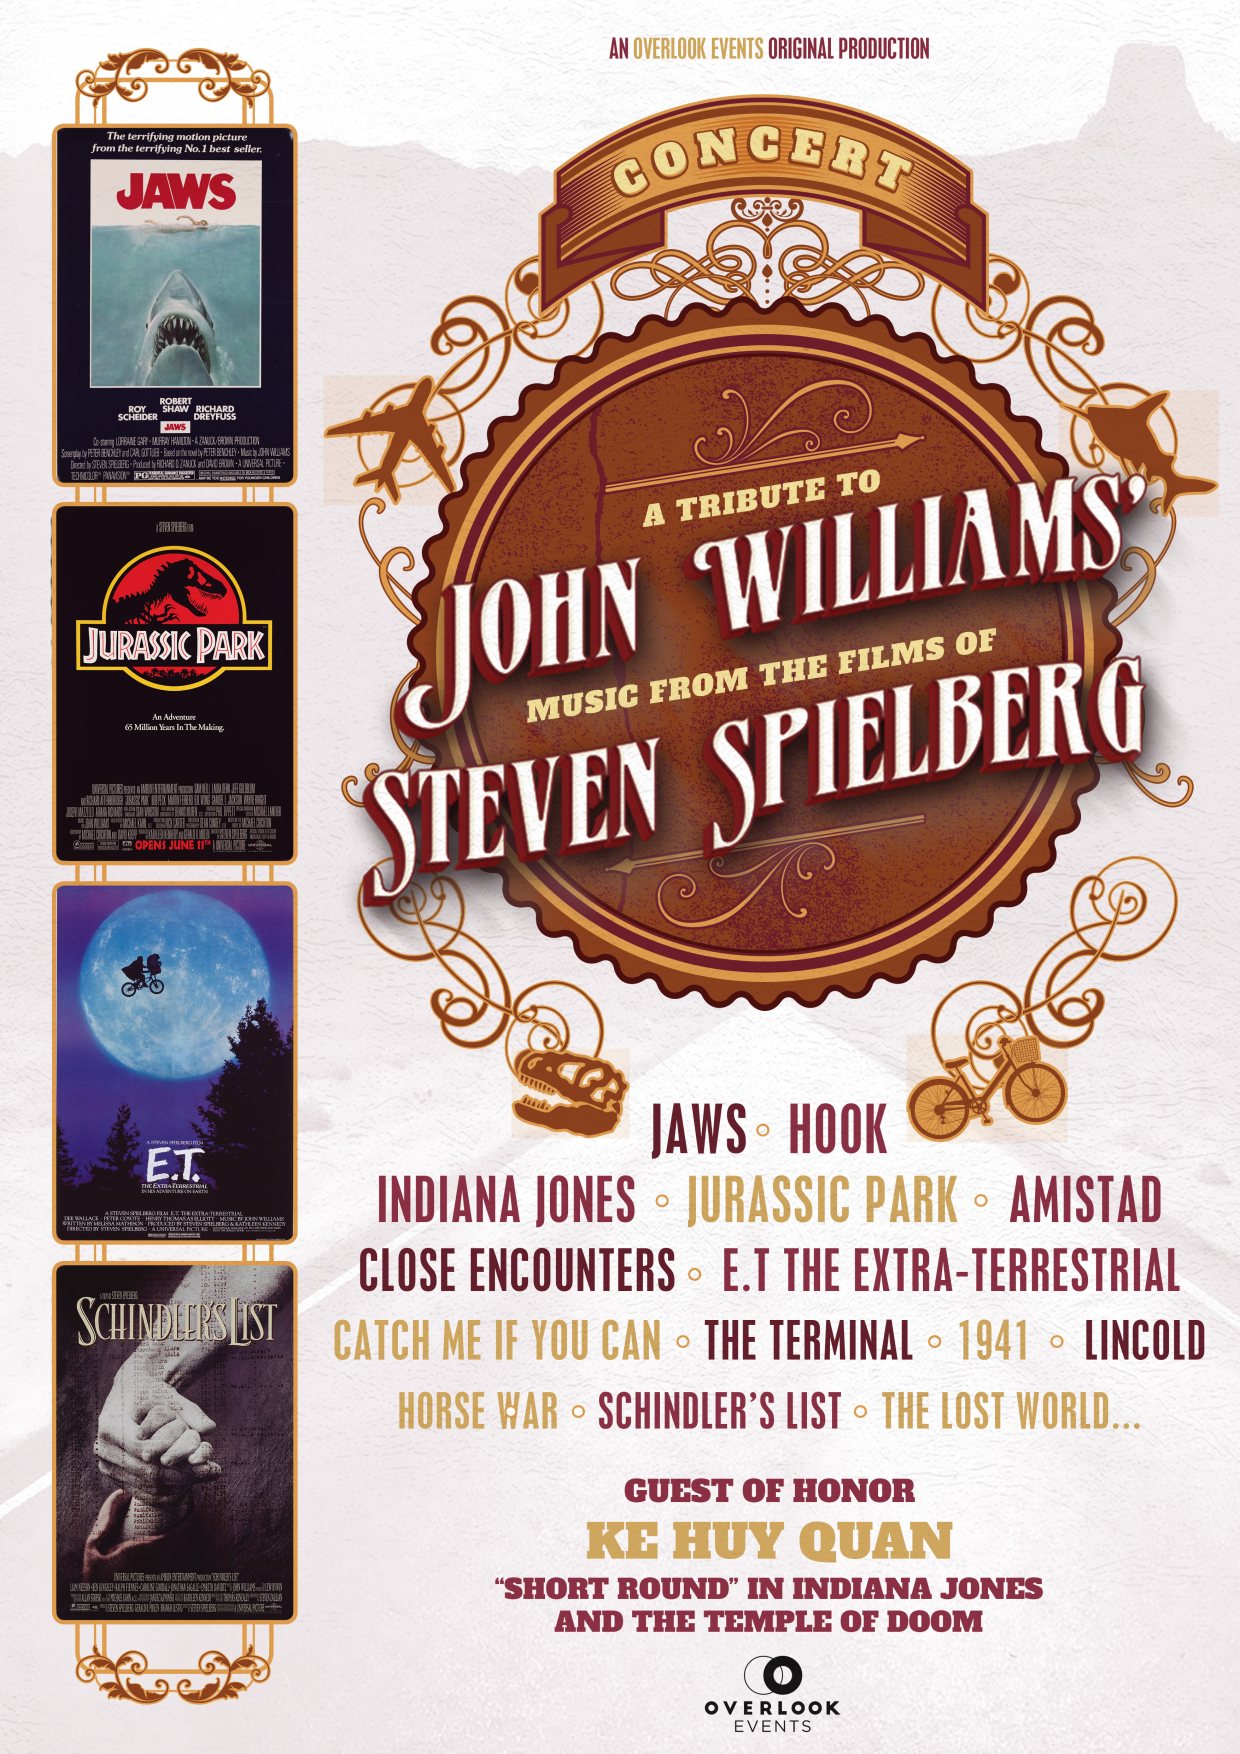 Tribute to John Williams: Music from the Films of Stephen Spielberg